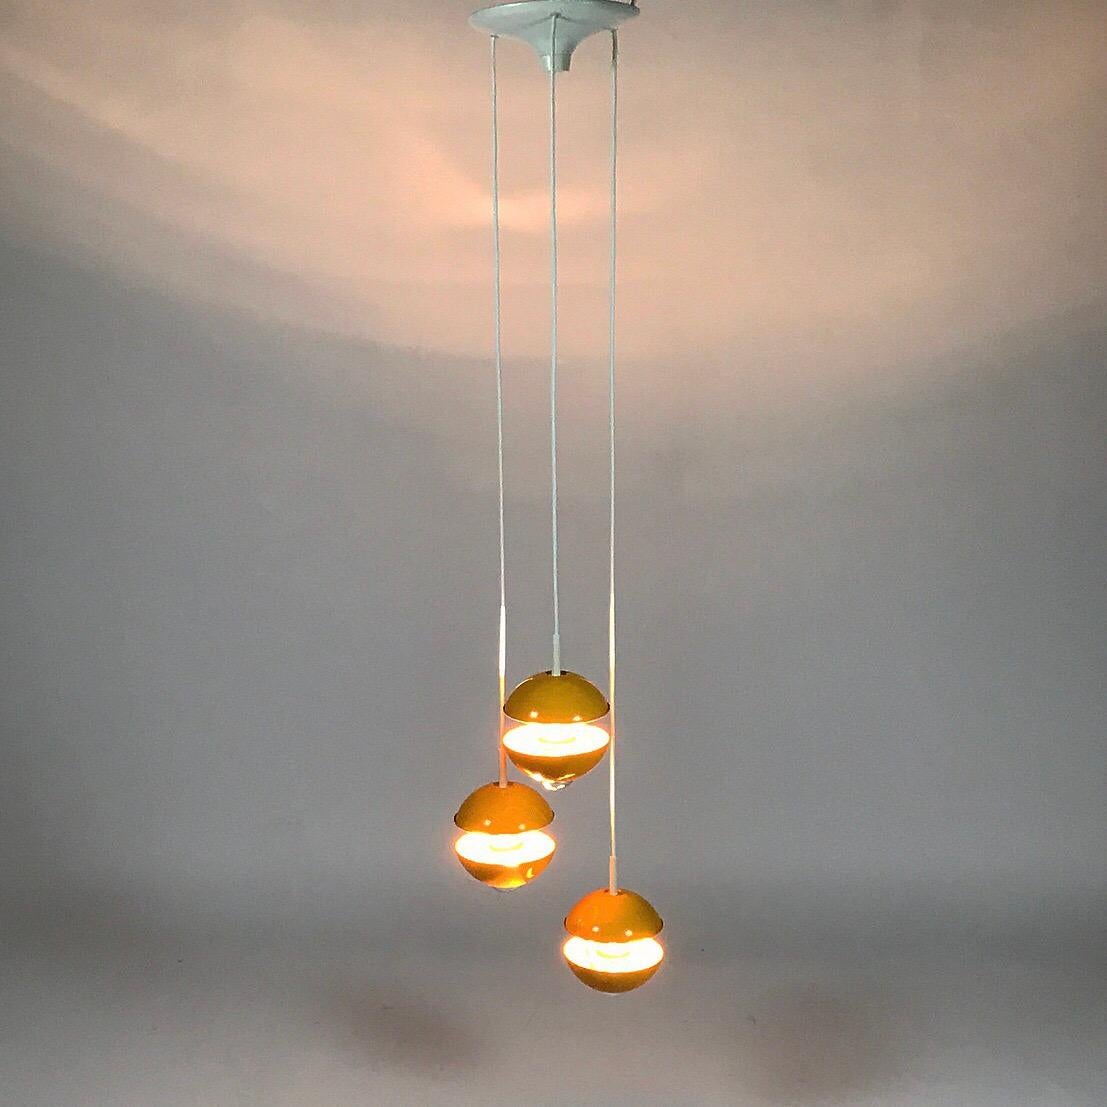 Lacquer Yellow cluster chandelier by Klaus Hempel for Kaiser Leuchten, Germany 1972